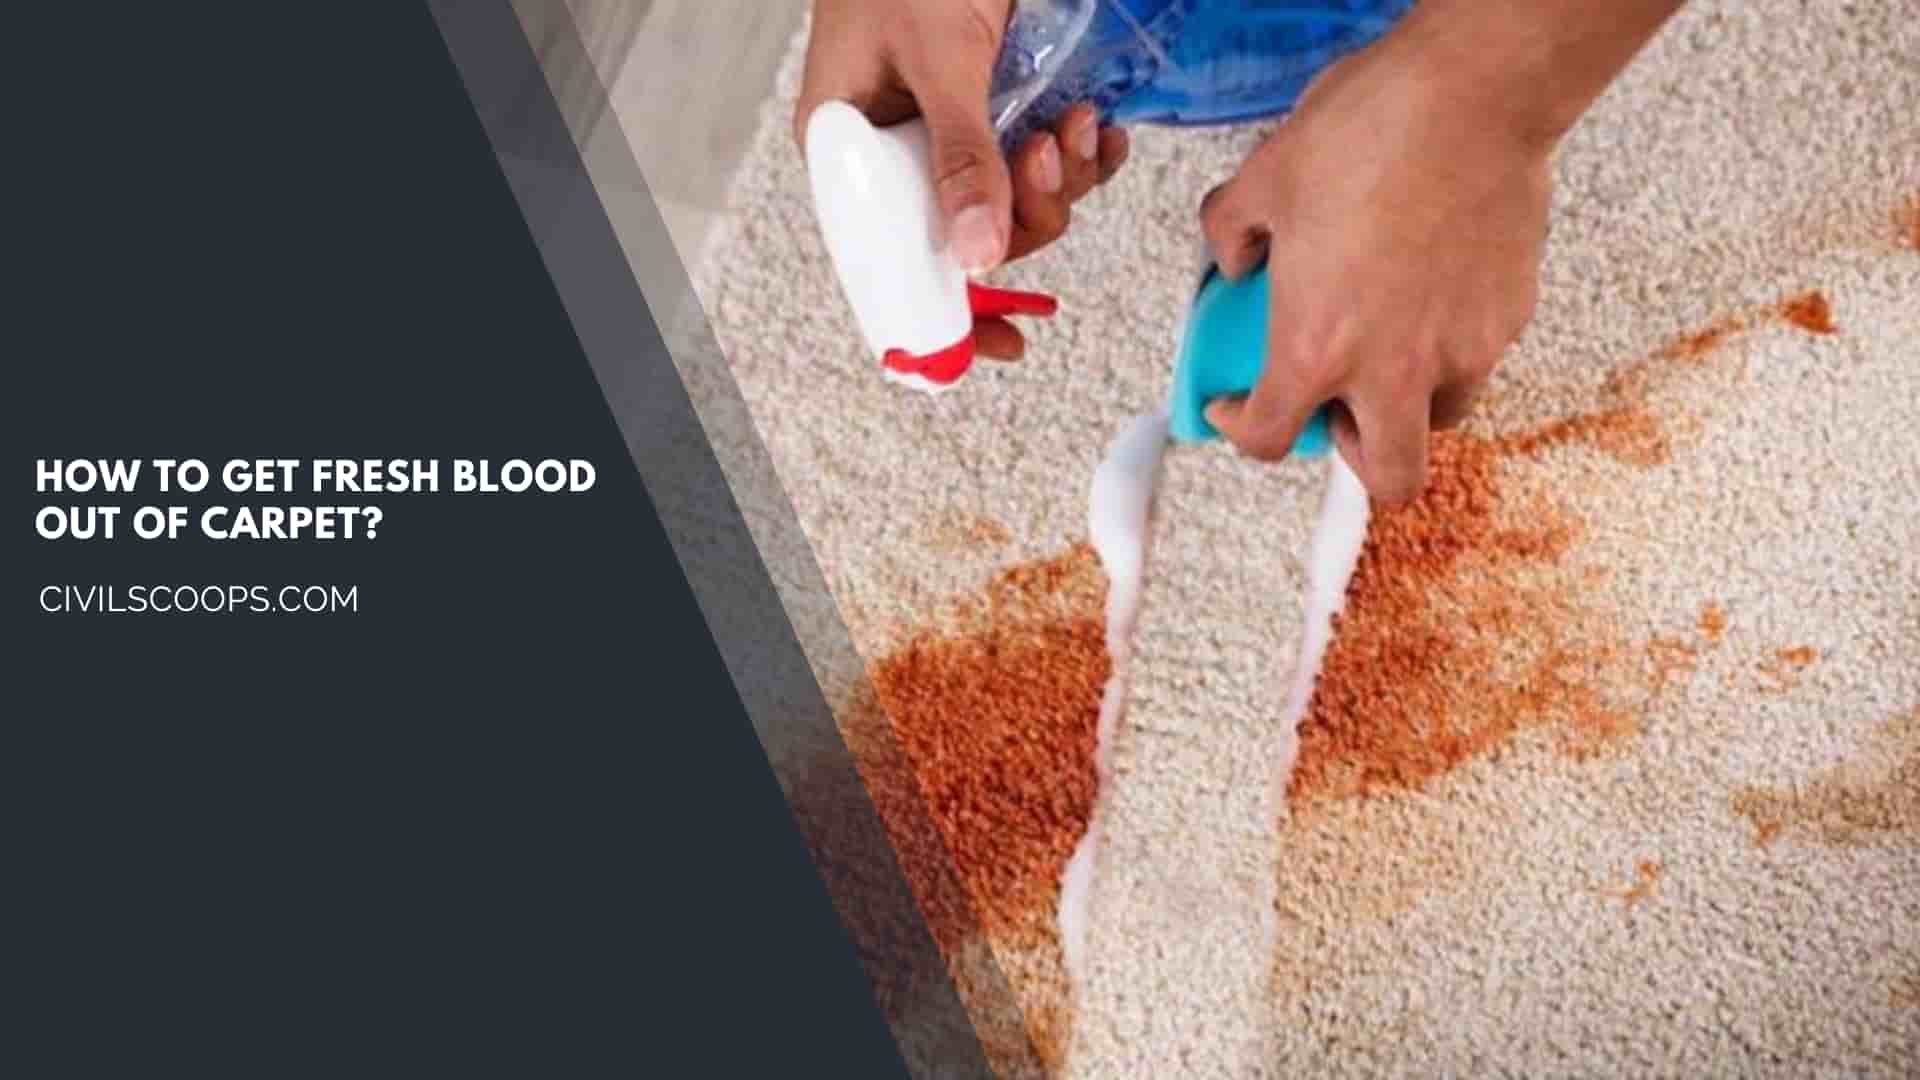 How to Get Fresh Blood Out of Carpet?